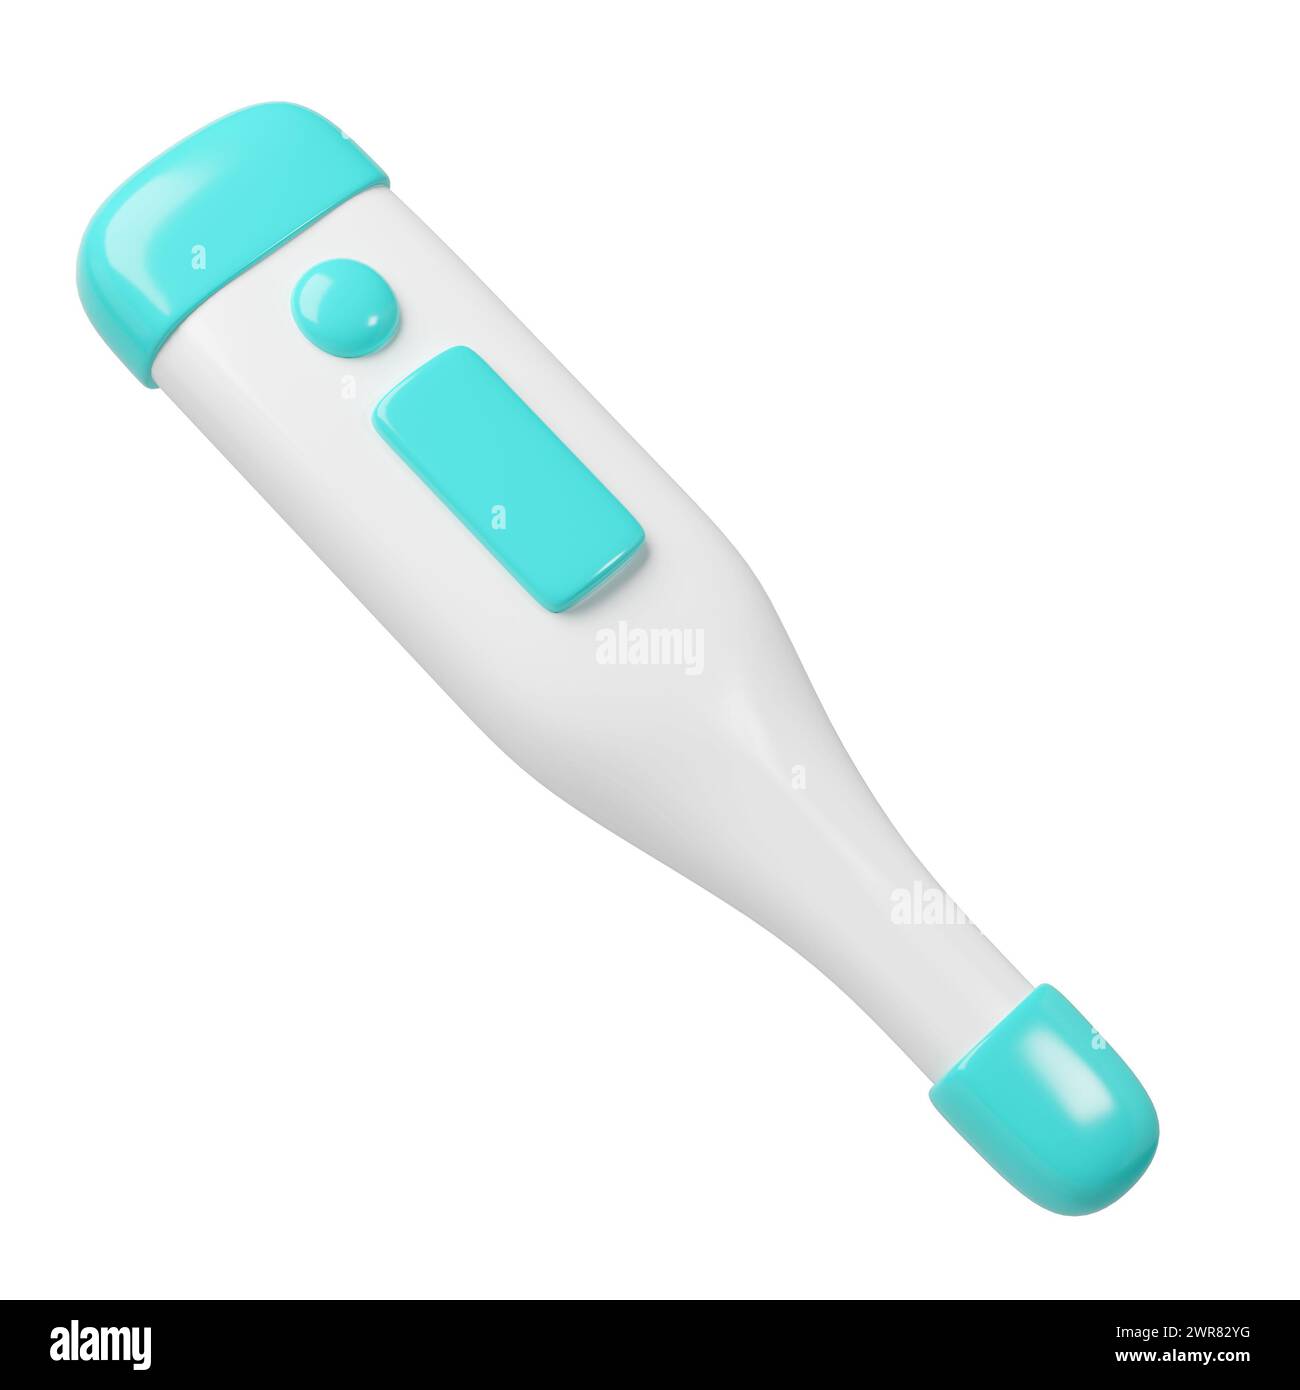 3d medical electronic thermometer icon. Rendering illustration of medicine diagnostic instrument to temperature measurement. Cute cartoon design Stock Photo